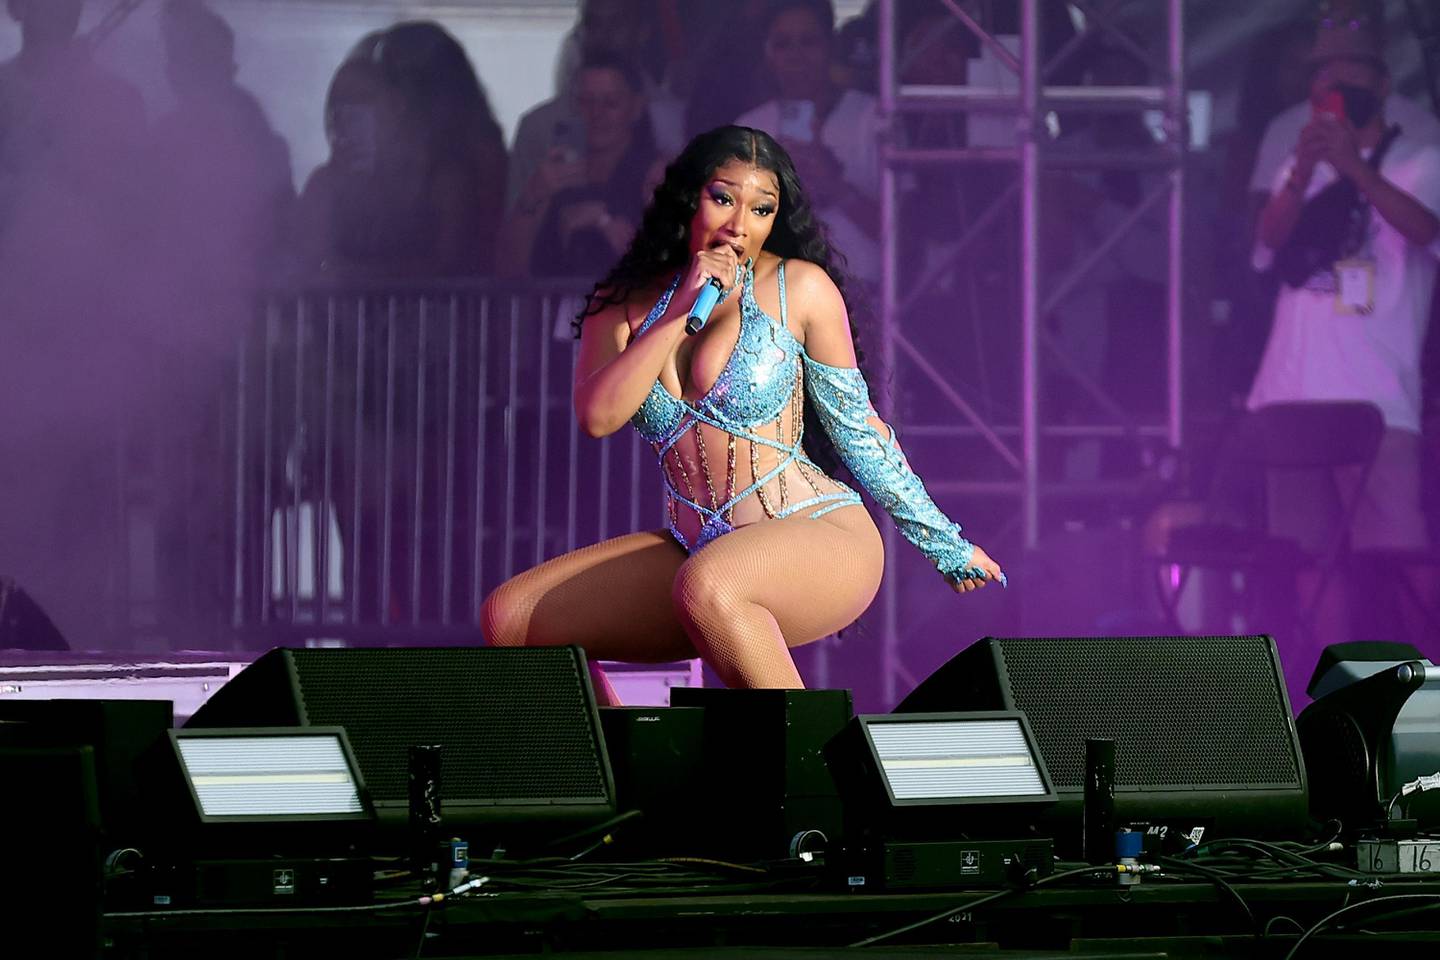 BALTIMORE, MARYLAND - MAY 20: Megan Thee Stallion performs during Preakness LIVE Culinary, Art & Music Festival hosted by 1/ST at Pimlico Race Course on May 20, 2022 in Baltimore, Maryland.